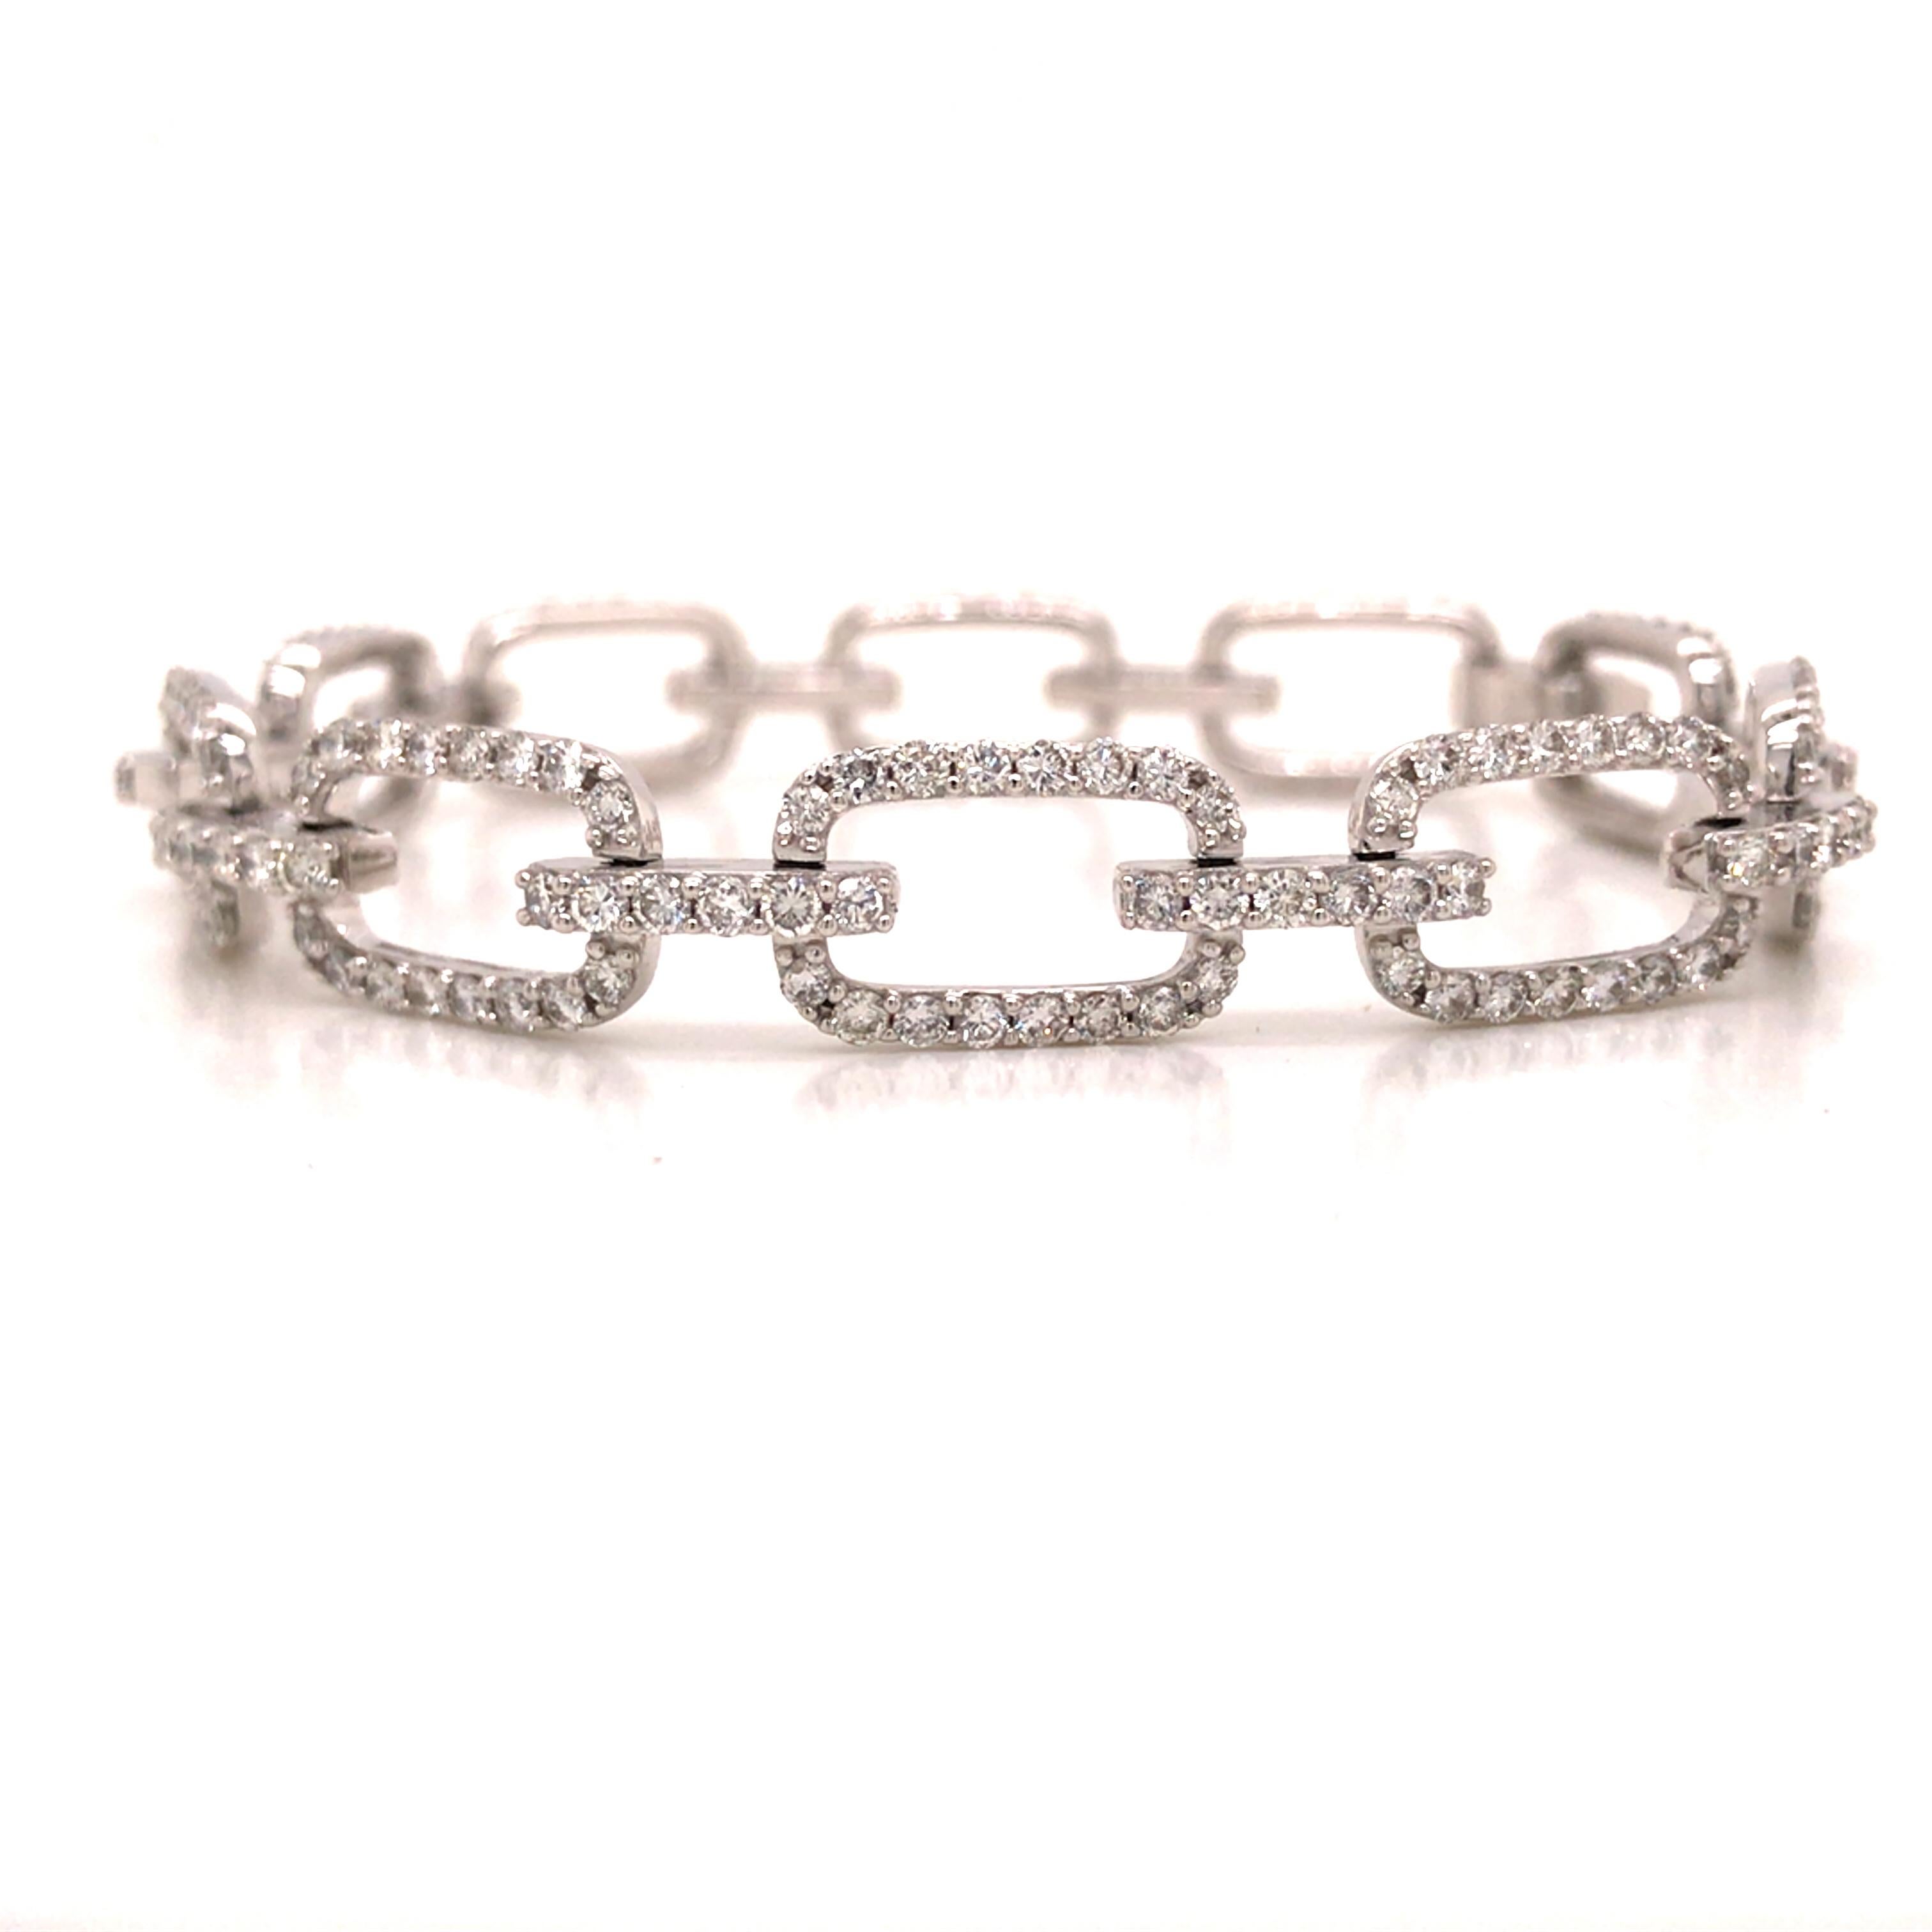 Diamond Link Bracelet in 18K White Gold.  Round Brilliant Cut Diamonds weighing 4.26 carat total weight, G-H in color and VS-SI in clarity are expertly set.  The Bracelet measures 7 inch in length and 3/8 inch in width. 20.6 grams.